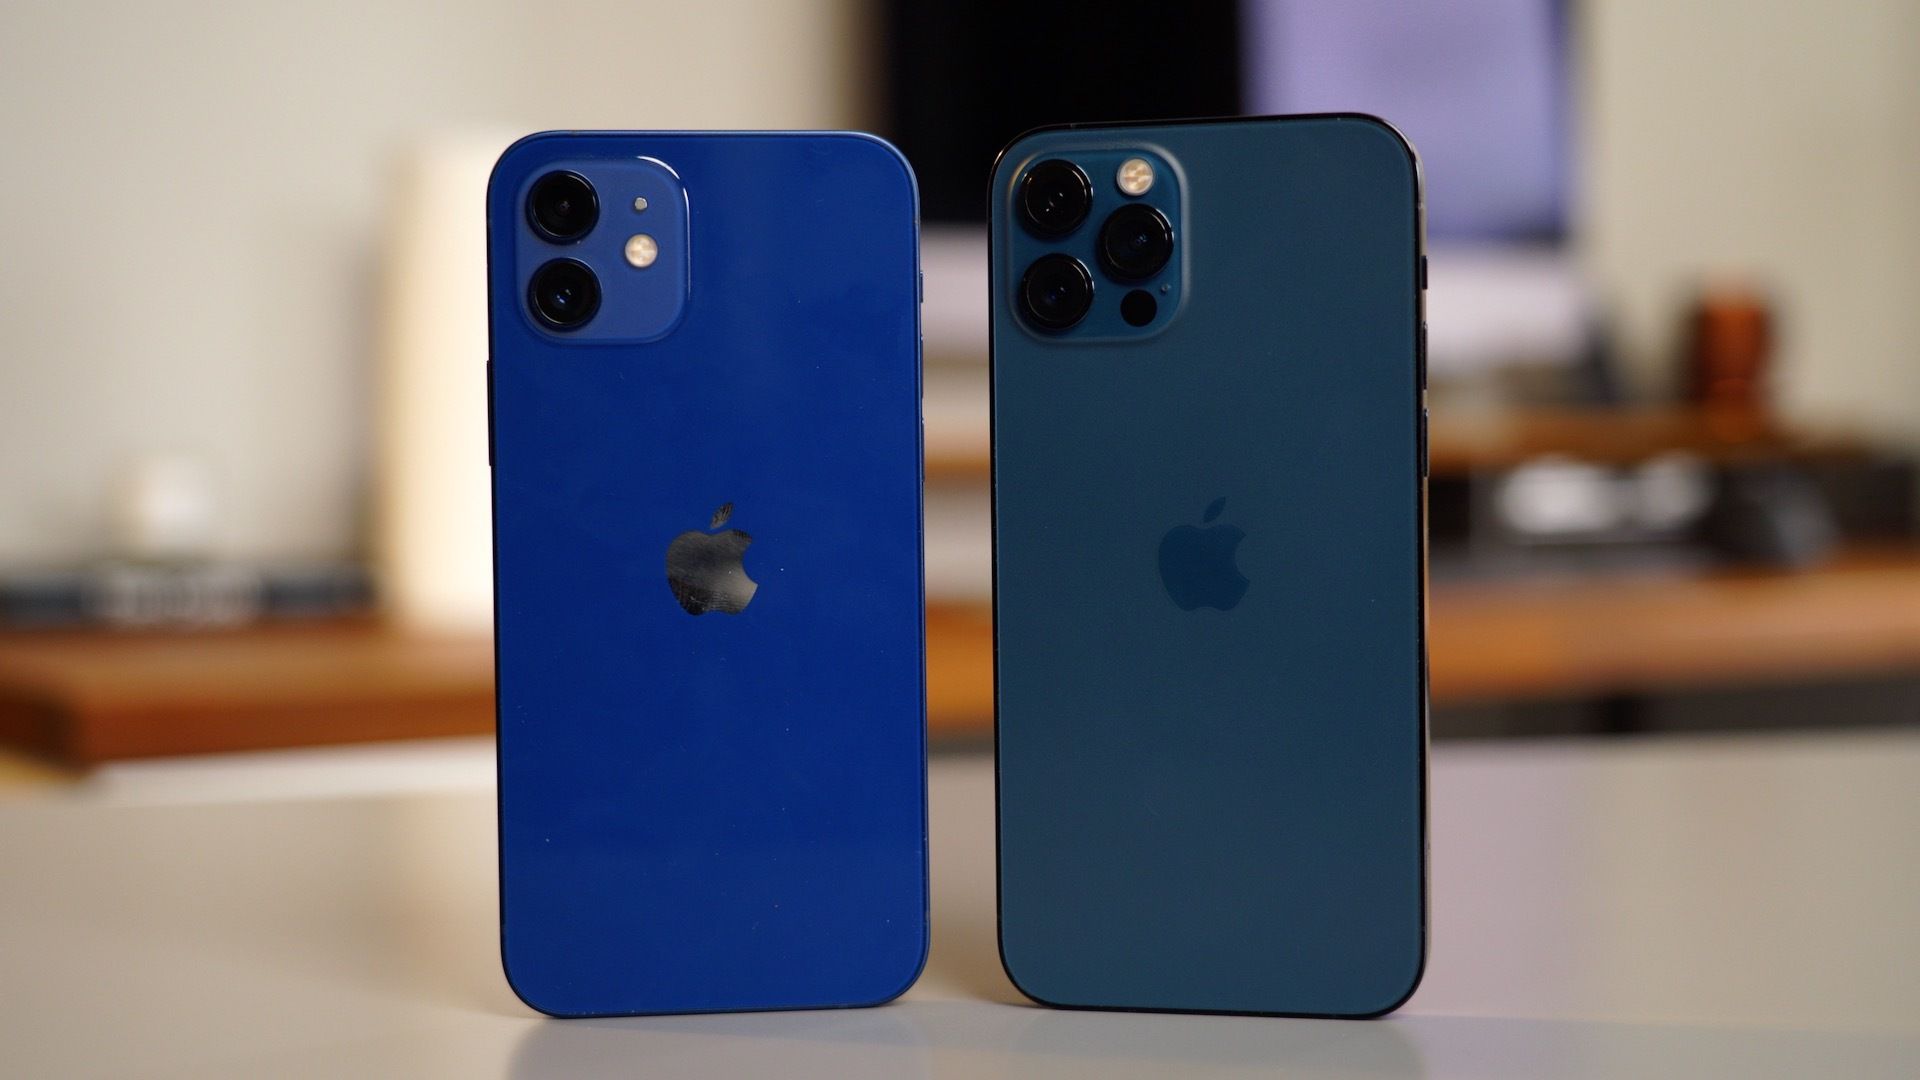 iPhone 12 vs iPhone 12 Pro: What's the difference?